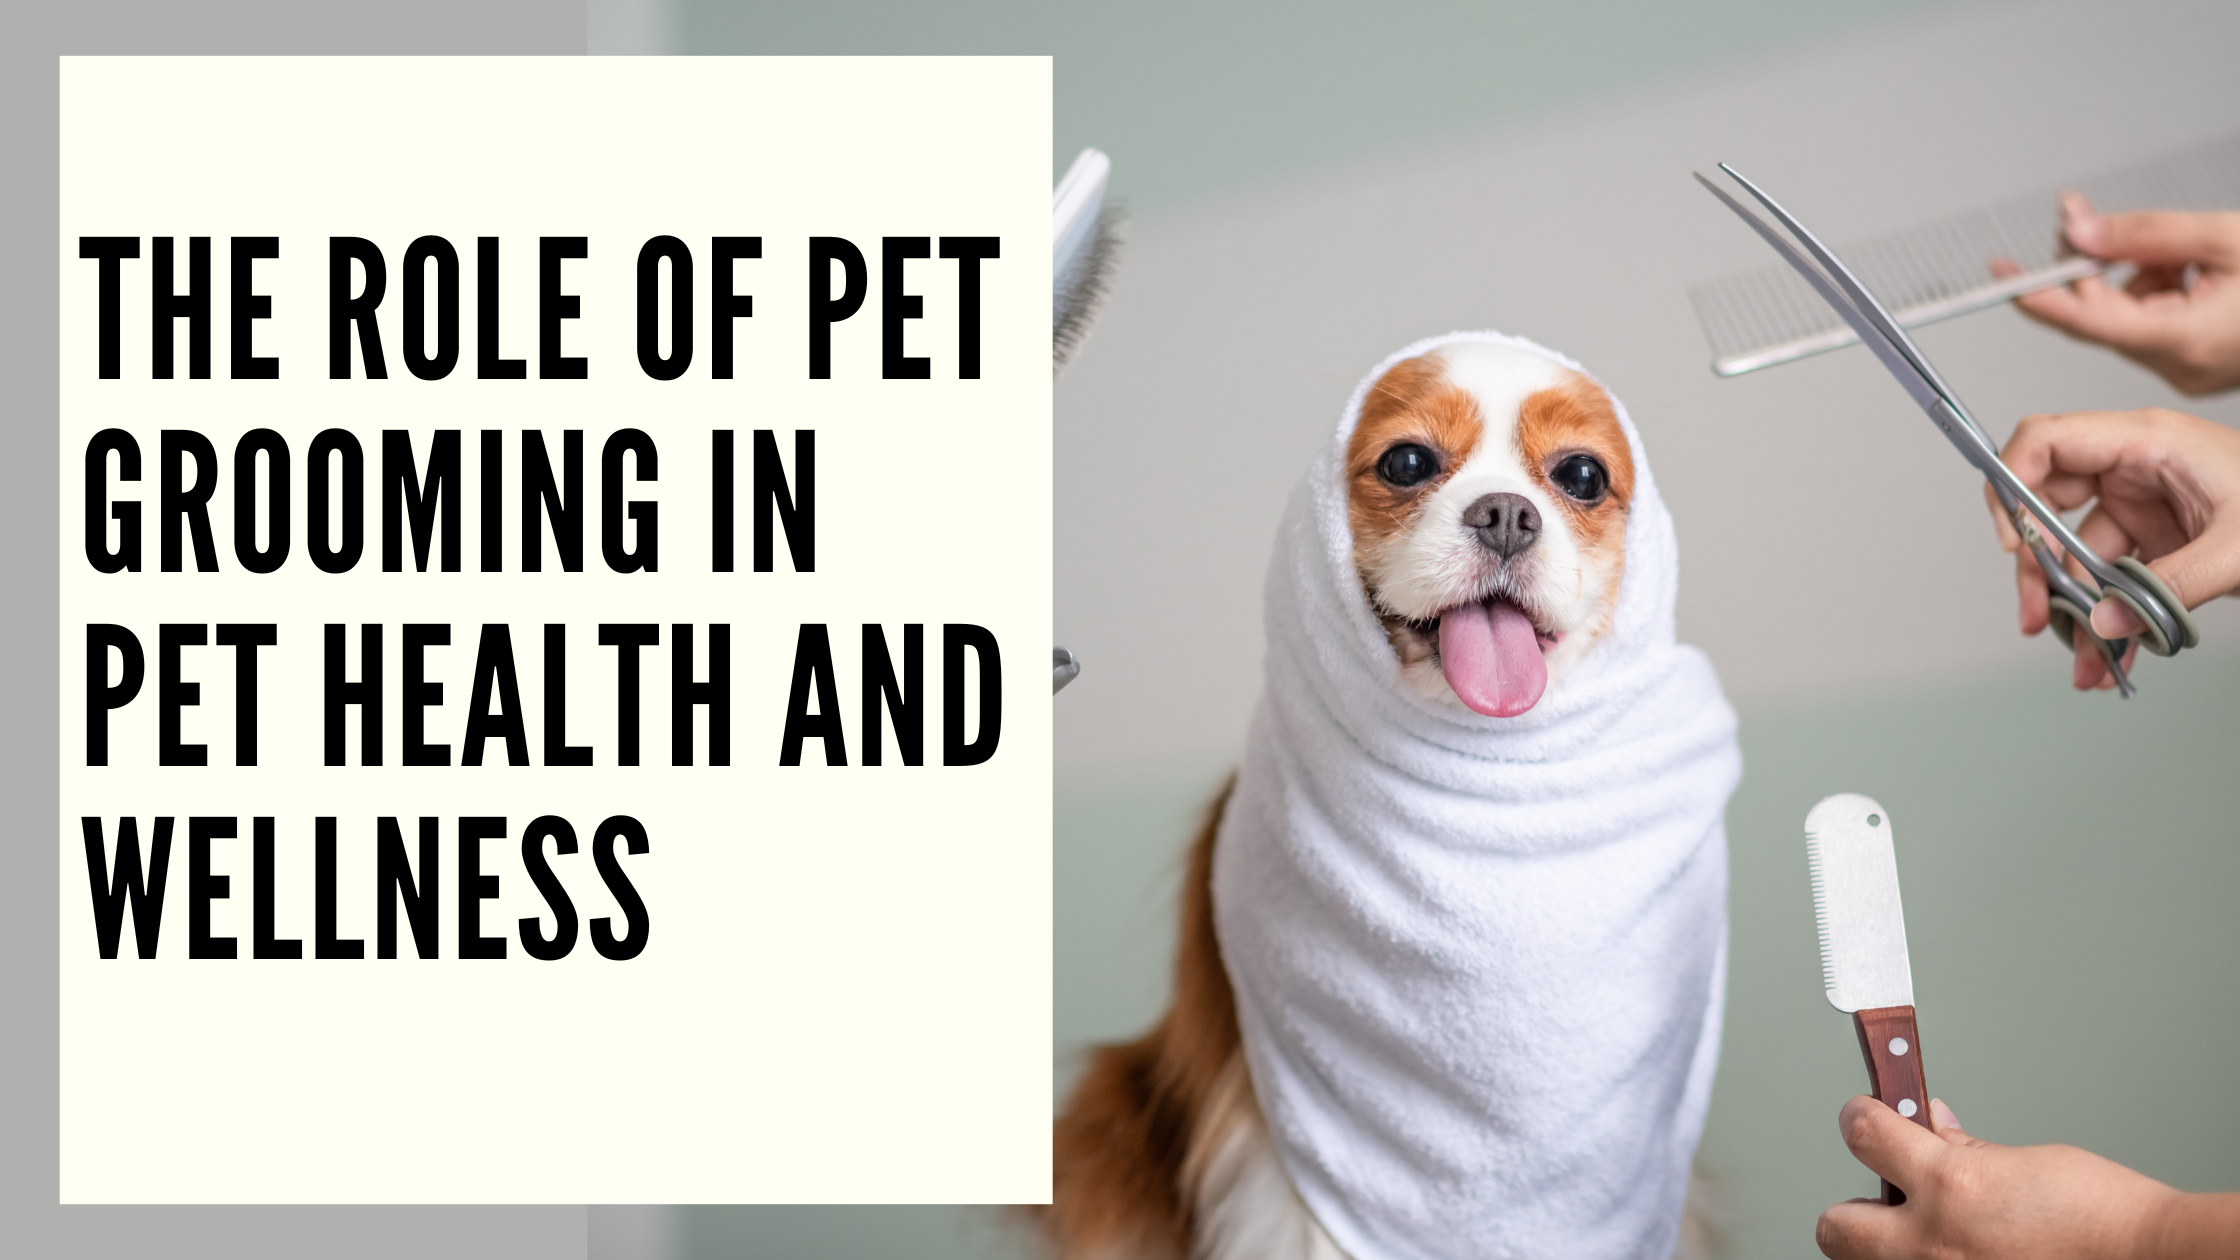 The Role of Pet Grooming in Pet Health and Wellness